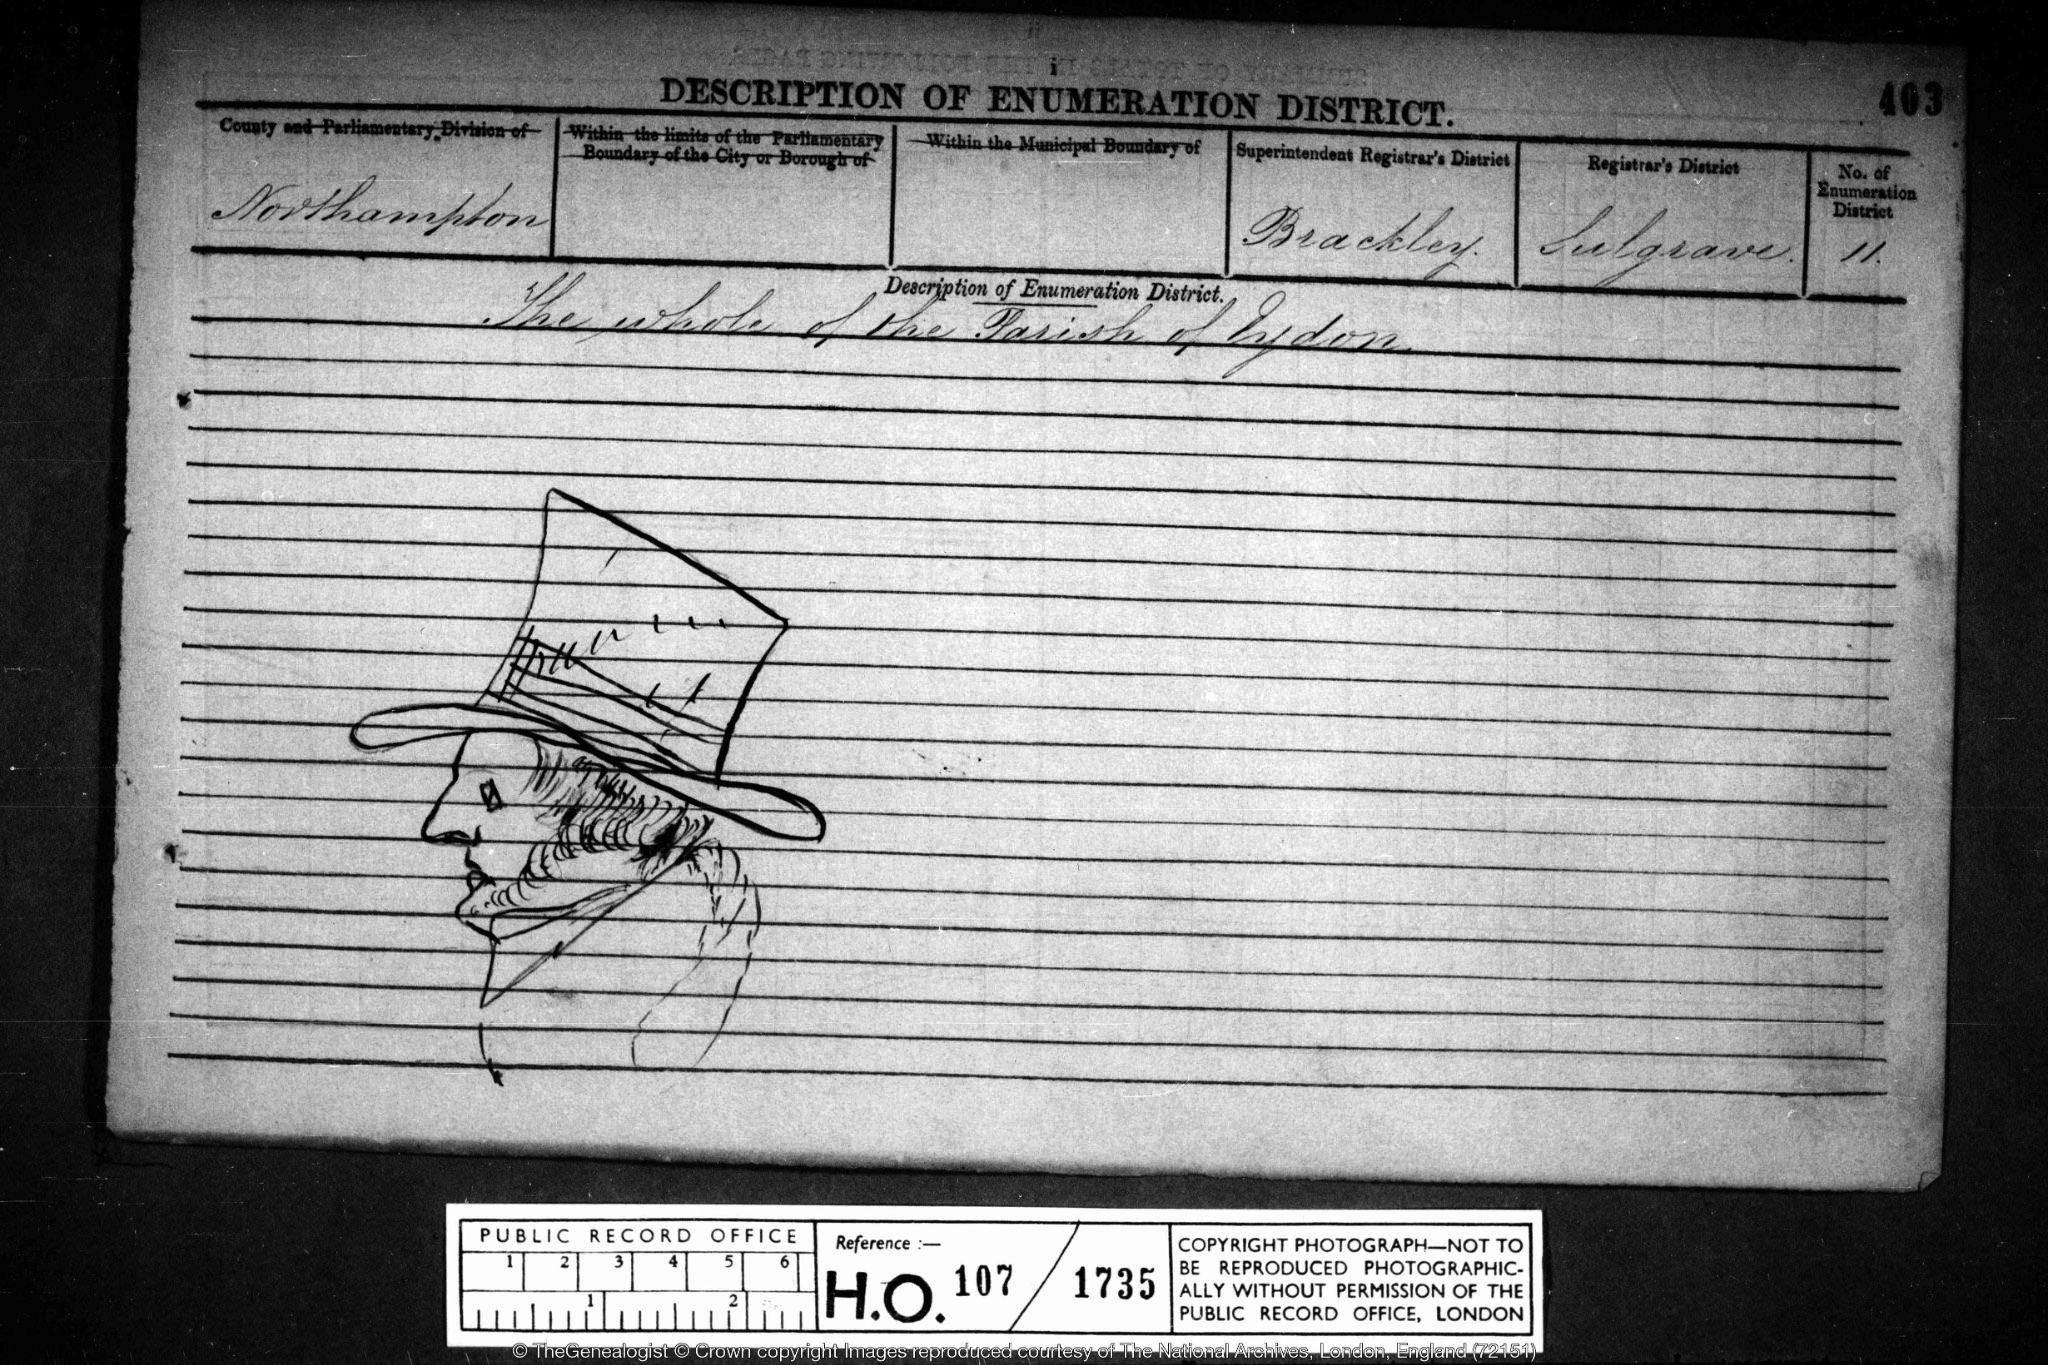 Occasionally even doodles like this can be found on the census images!